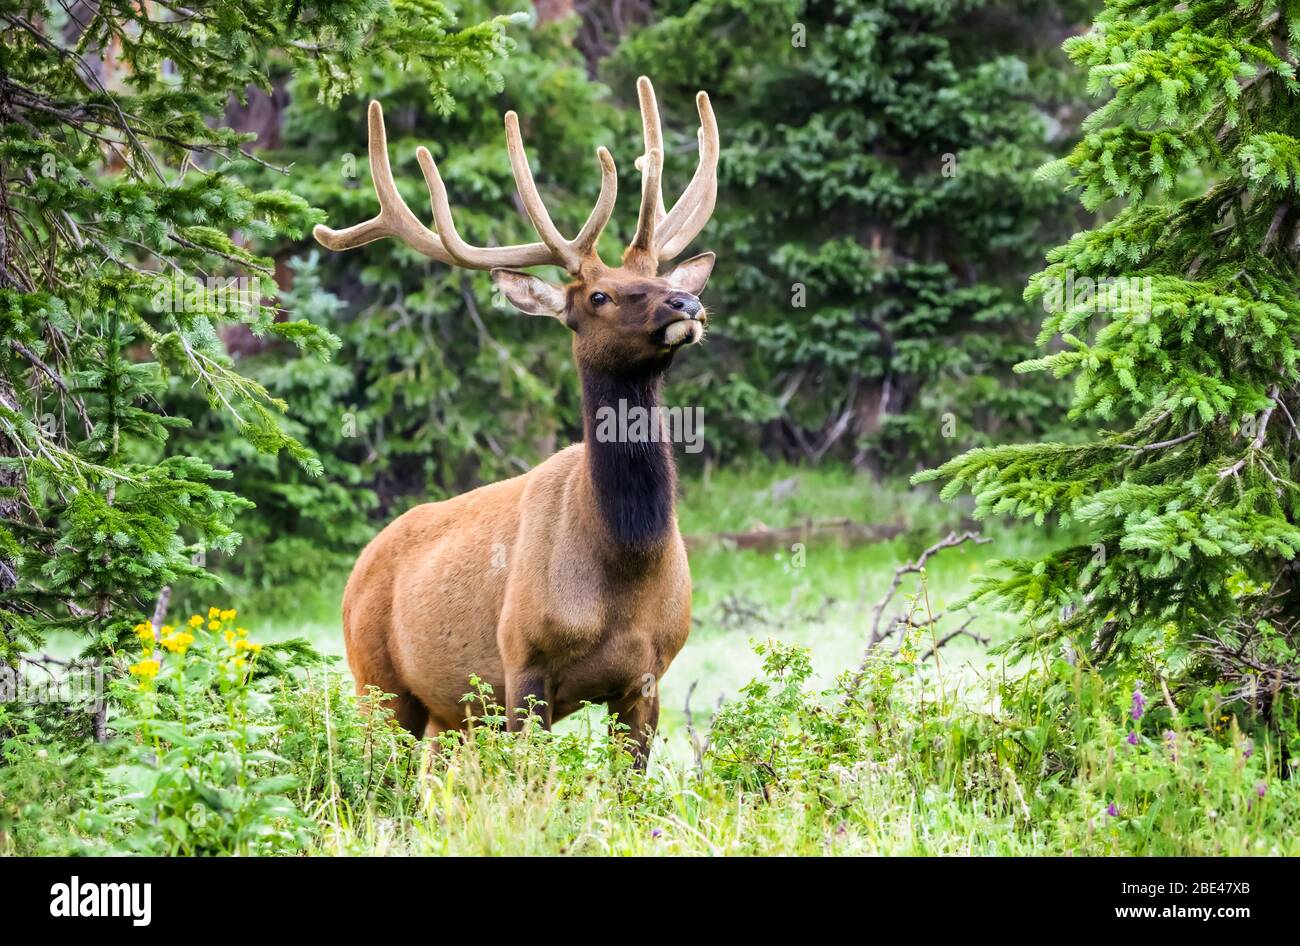 Bull Elk (Cervus canadensis) standing at the edge of a forest; Estes Park, Colorado, United States of America Stock Photo